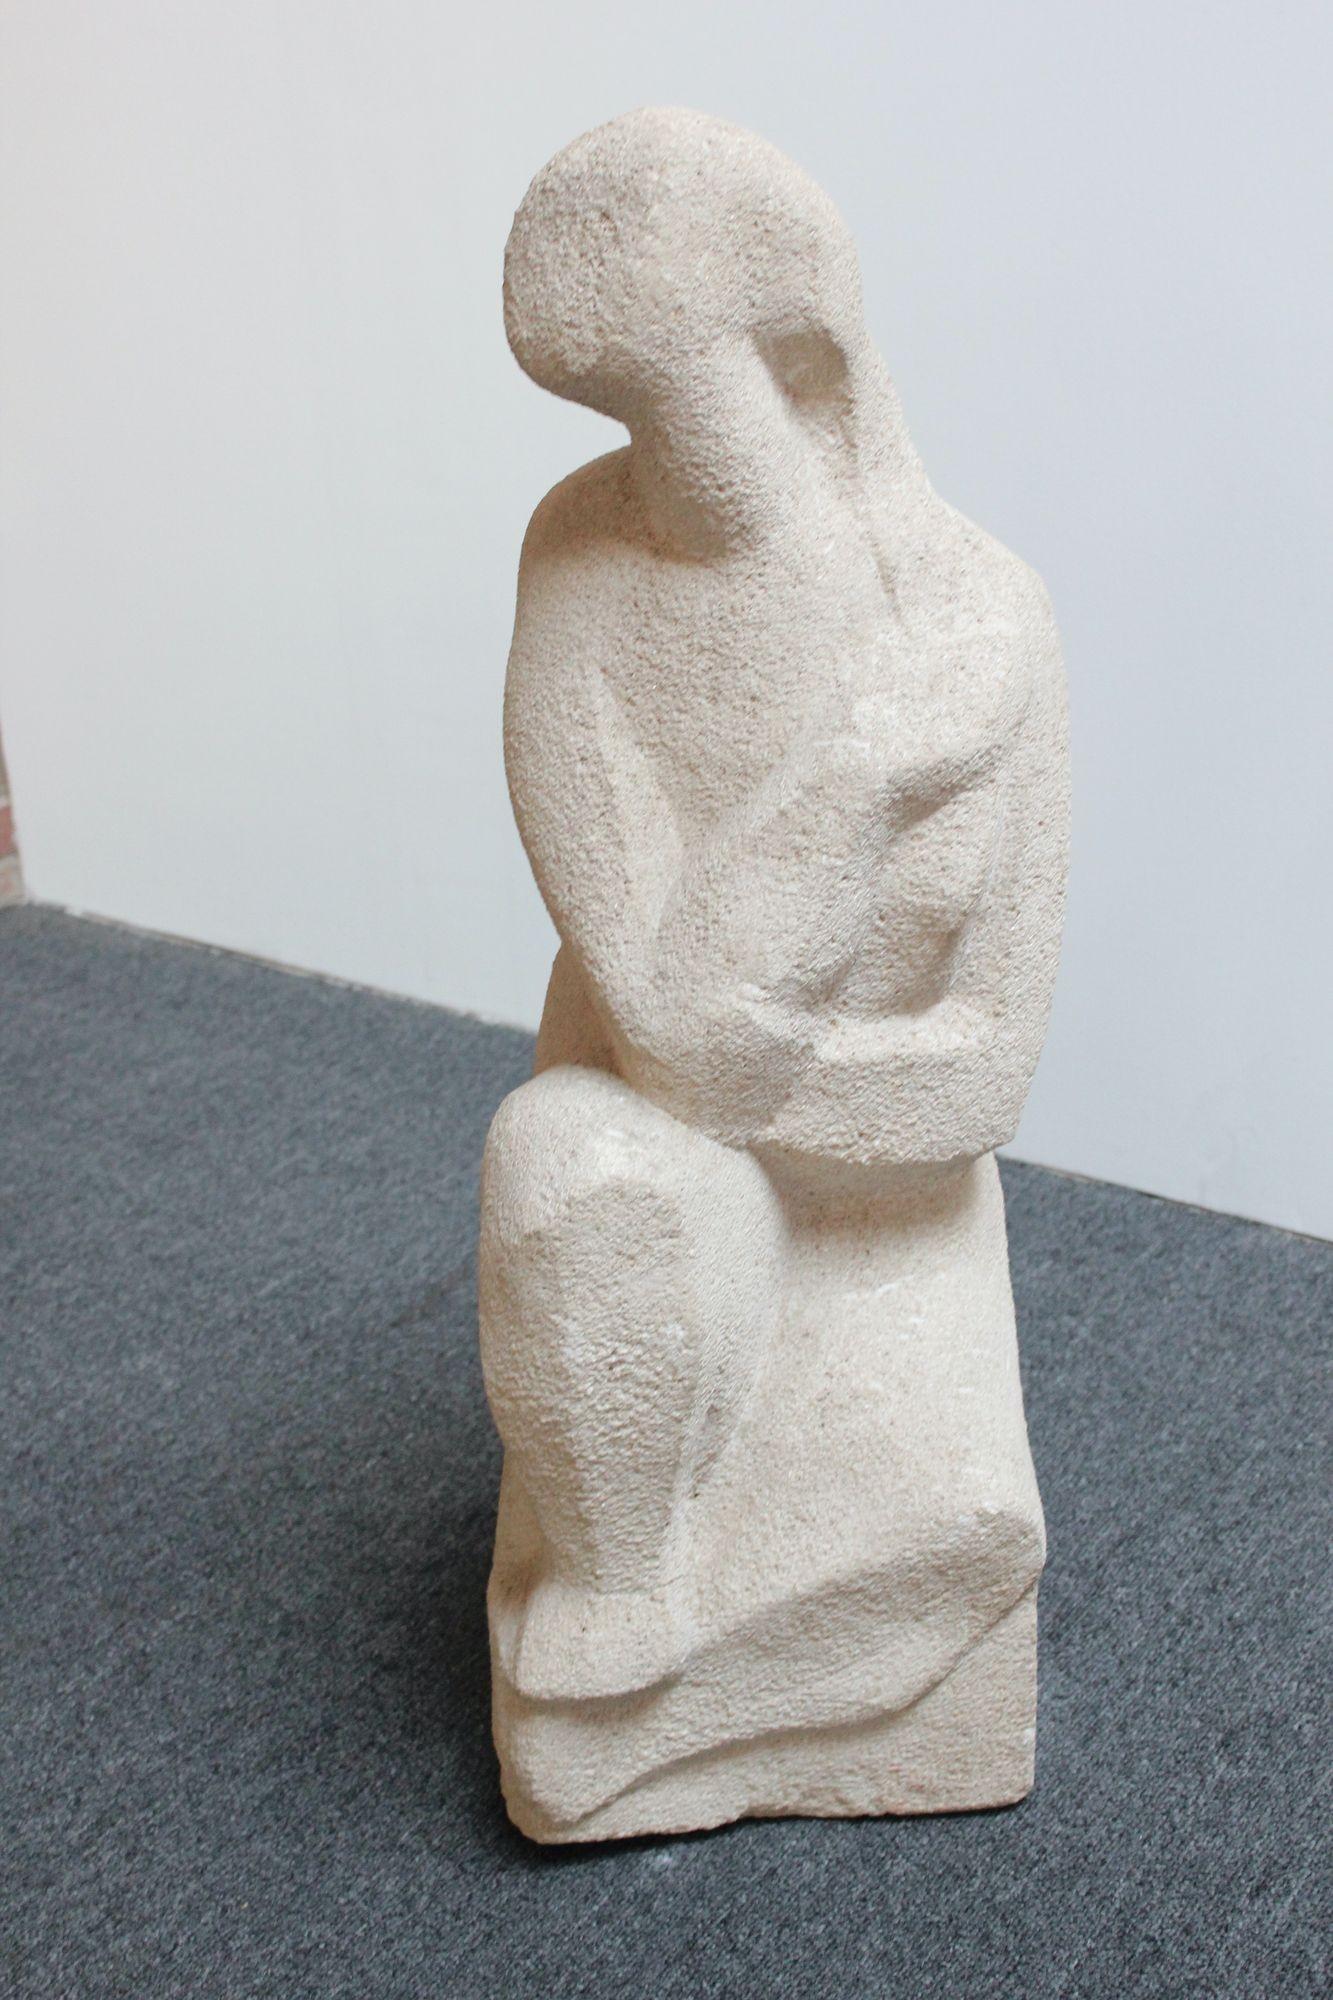 Honorio Garcia Condoy (b. Honorio Garcia, 1900, Zaragoza, d. 1953 Madrid) figurative sculpture in carved stone depicting a faceless virgin (ca. 1930s).
A contemporary and close friend of Picasso, Condoy drew a lot of inspiration from the shapes and